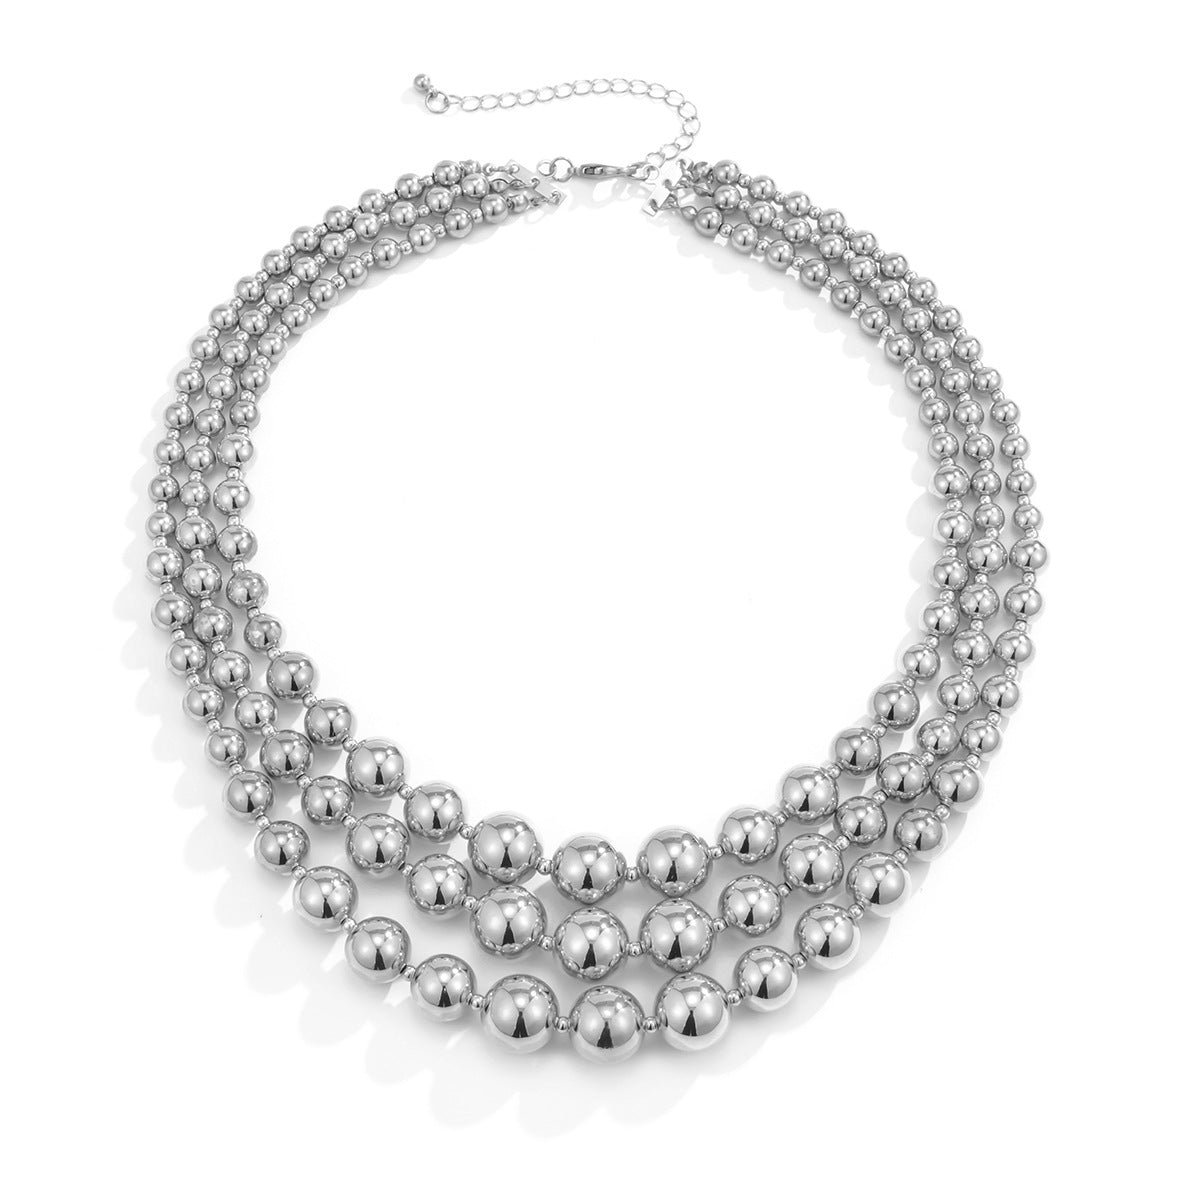 Multi-layer women's necklace with round beads